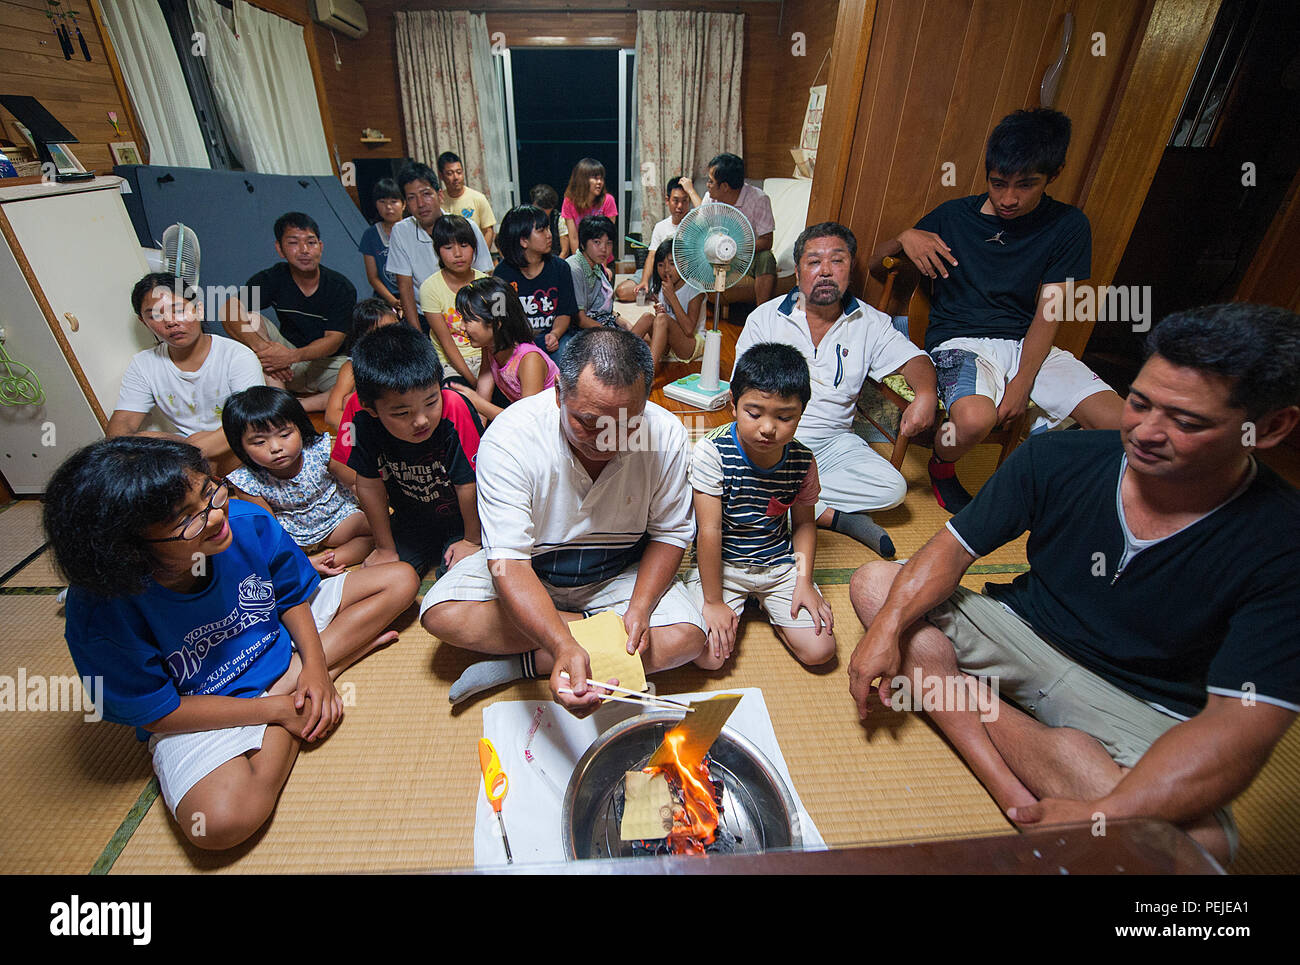 Sousei Yamakawa, owner of the house, burns uchikabi, money of the other world, while surrounded by relatives in Yomitan village, Okinawa, Japan, Aug. 28, 2015. Okinawans invite their ancestral spirits to visit the family's Buddhist altar during this traditional period. (U.S. Air Force photo by Naoto Anazawa) Stock Photo